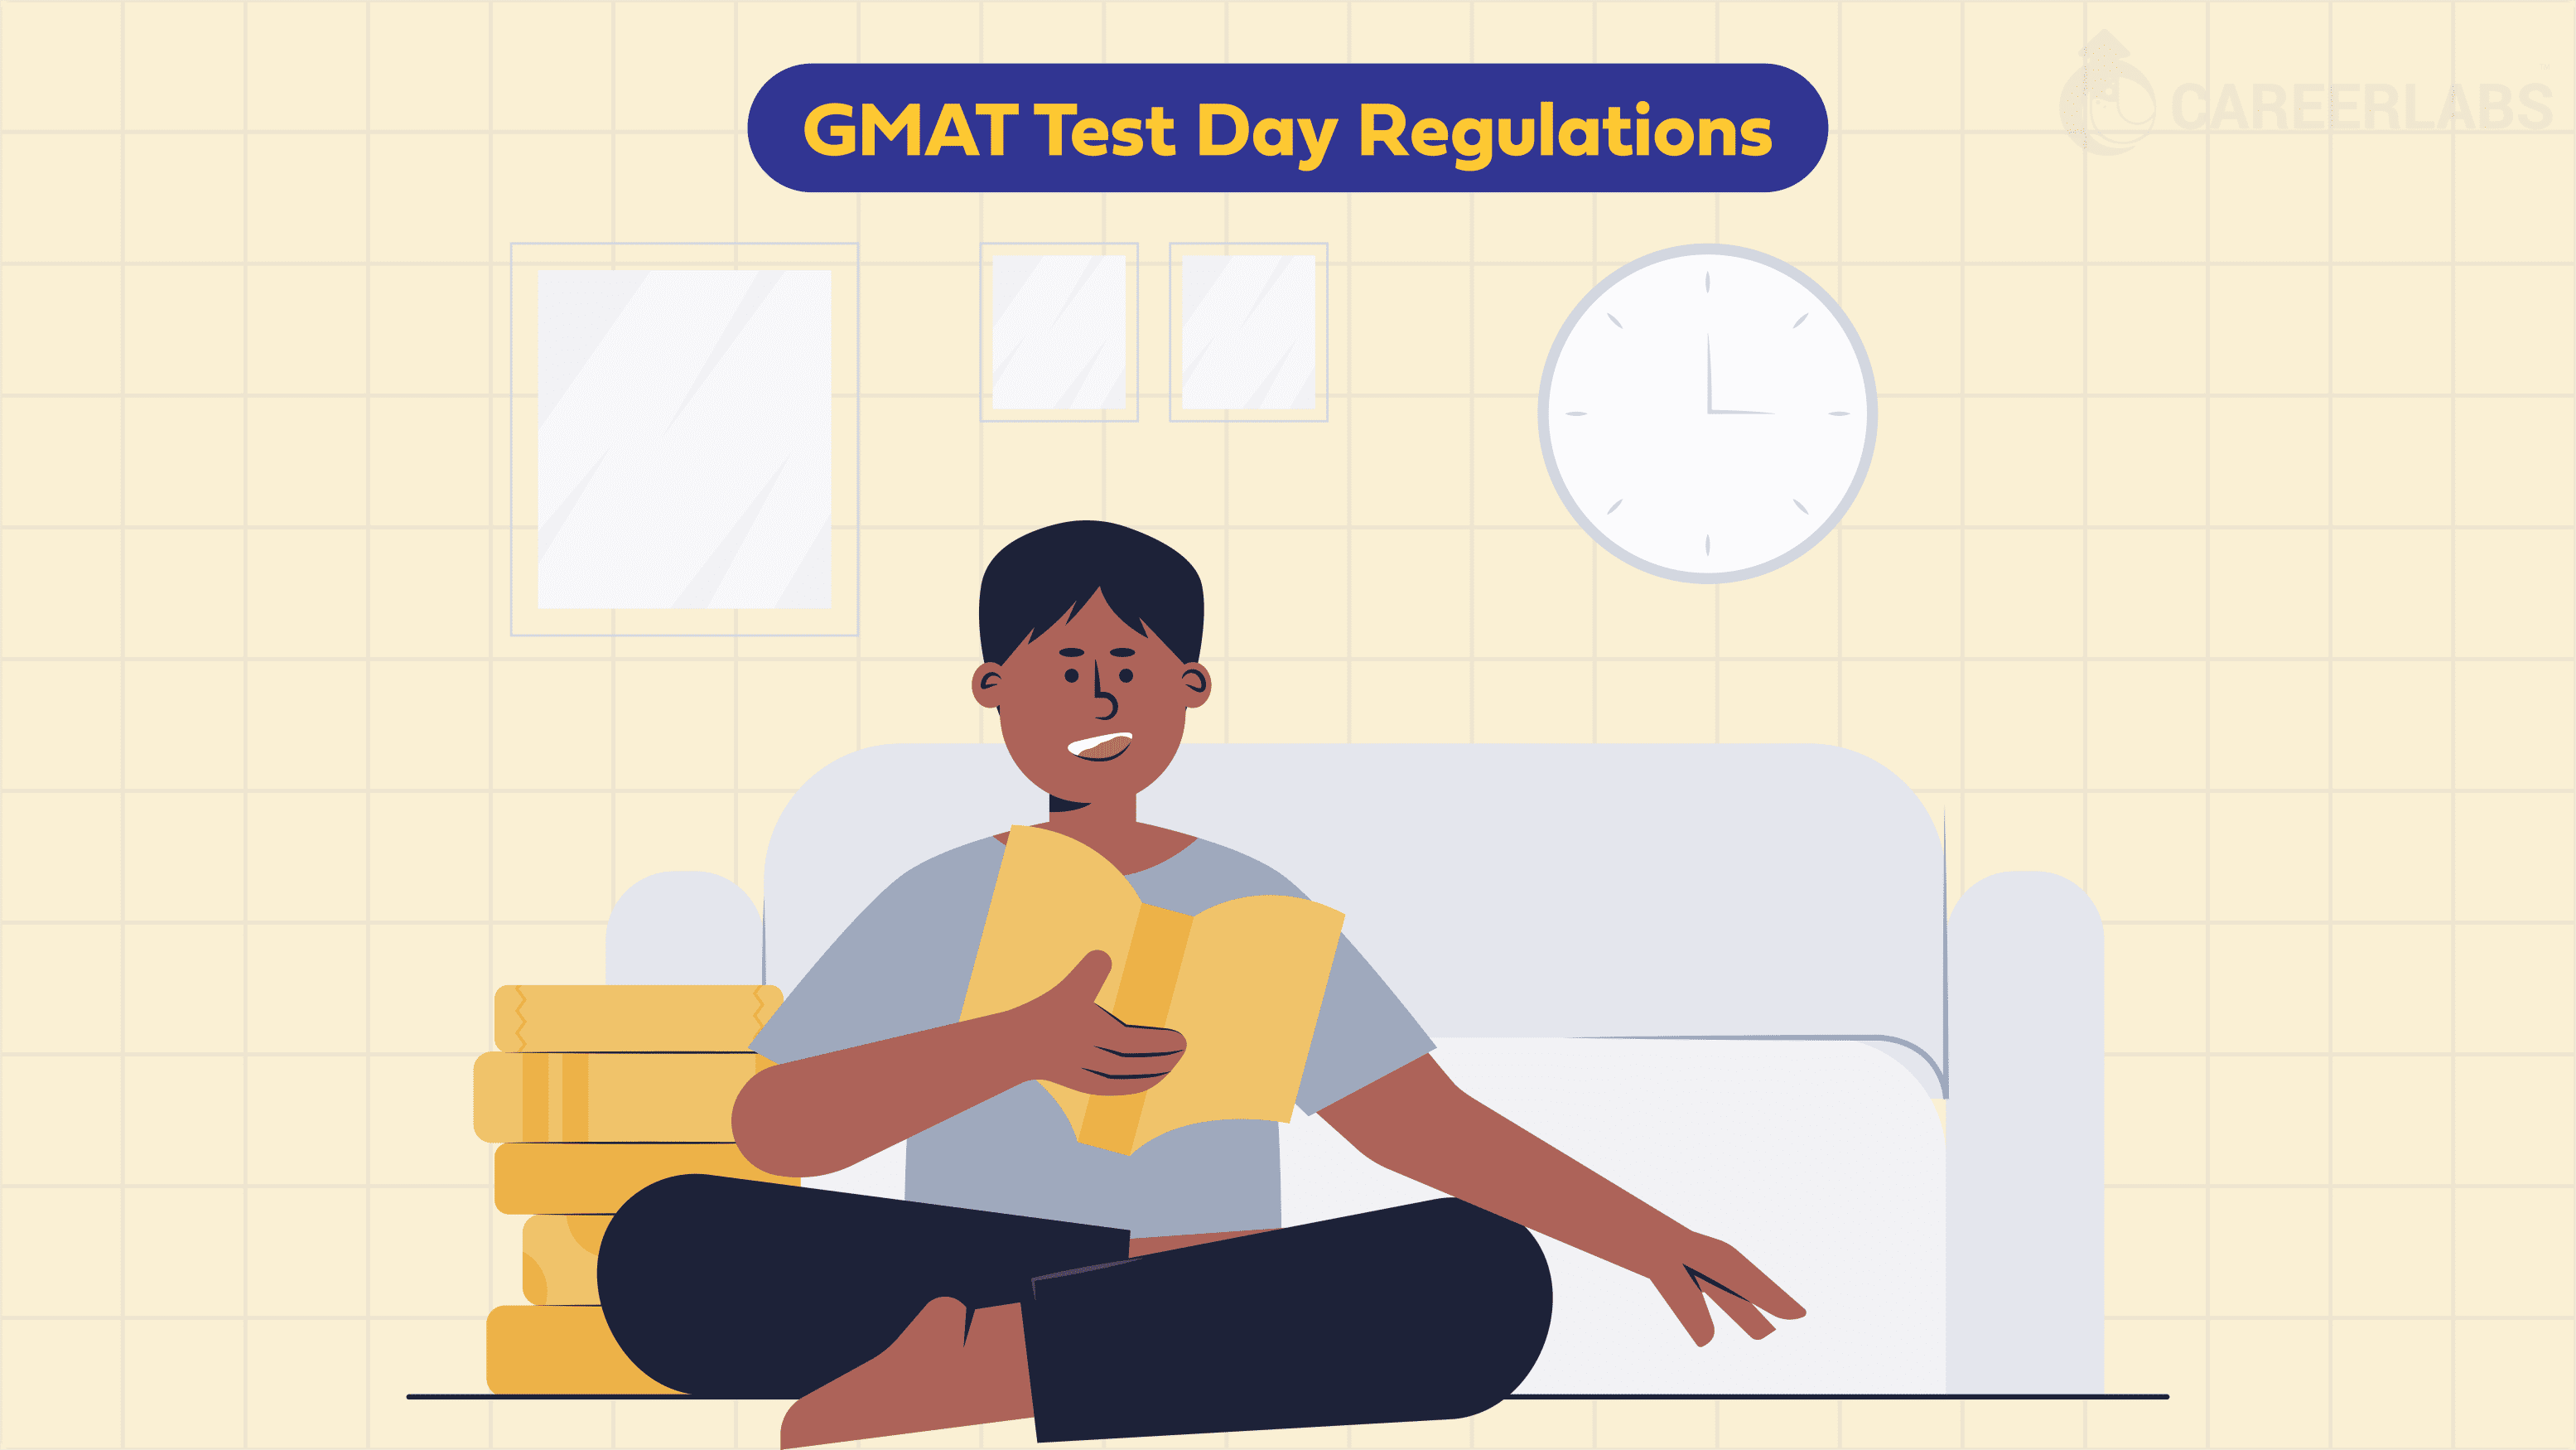 All You Need to Know About GMAT Test Day Regulations